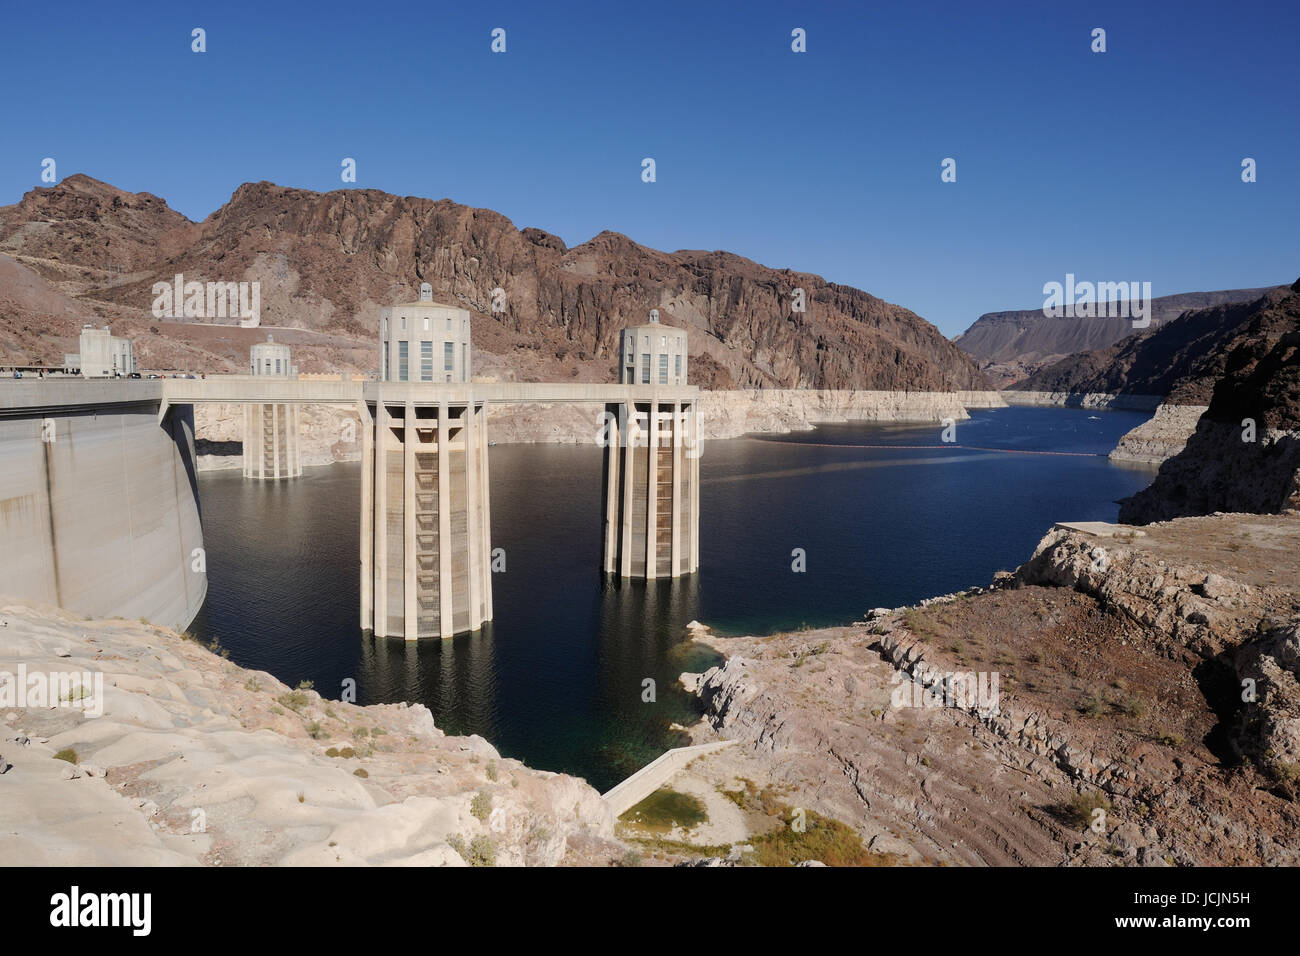 Hoover Dam on the Colorado River, Lake Mead. Penstock feed towers, USA Nevada border Stock Photo